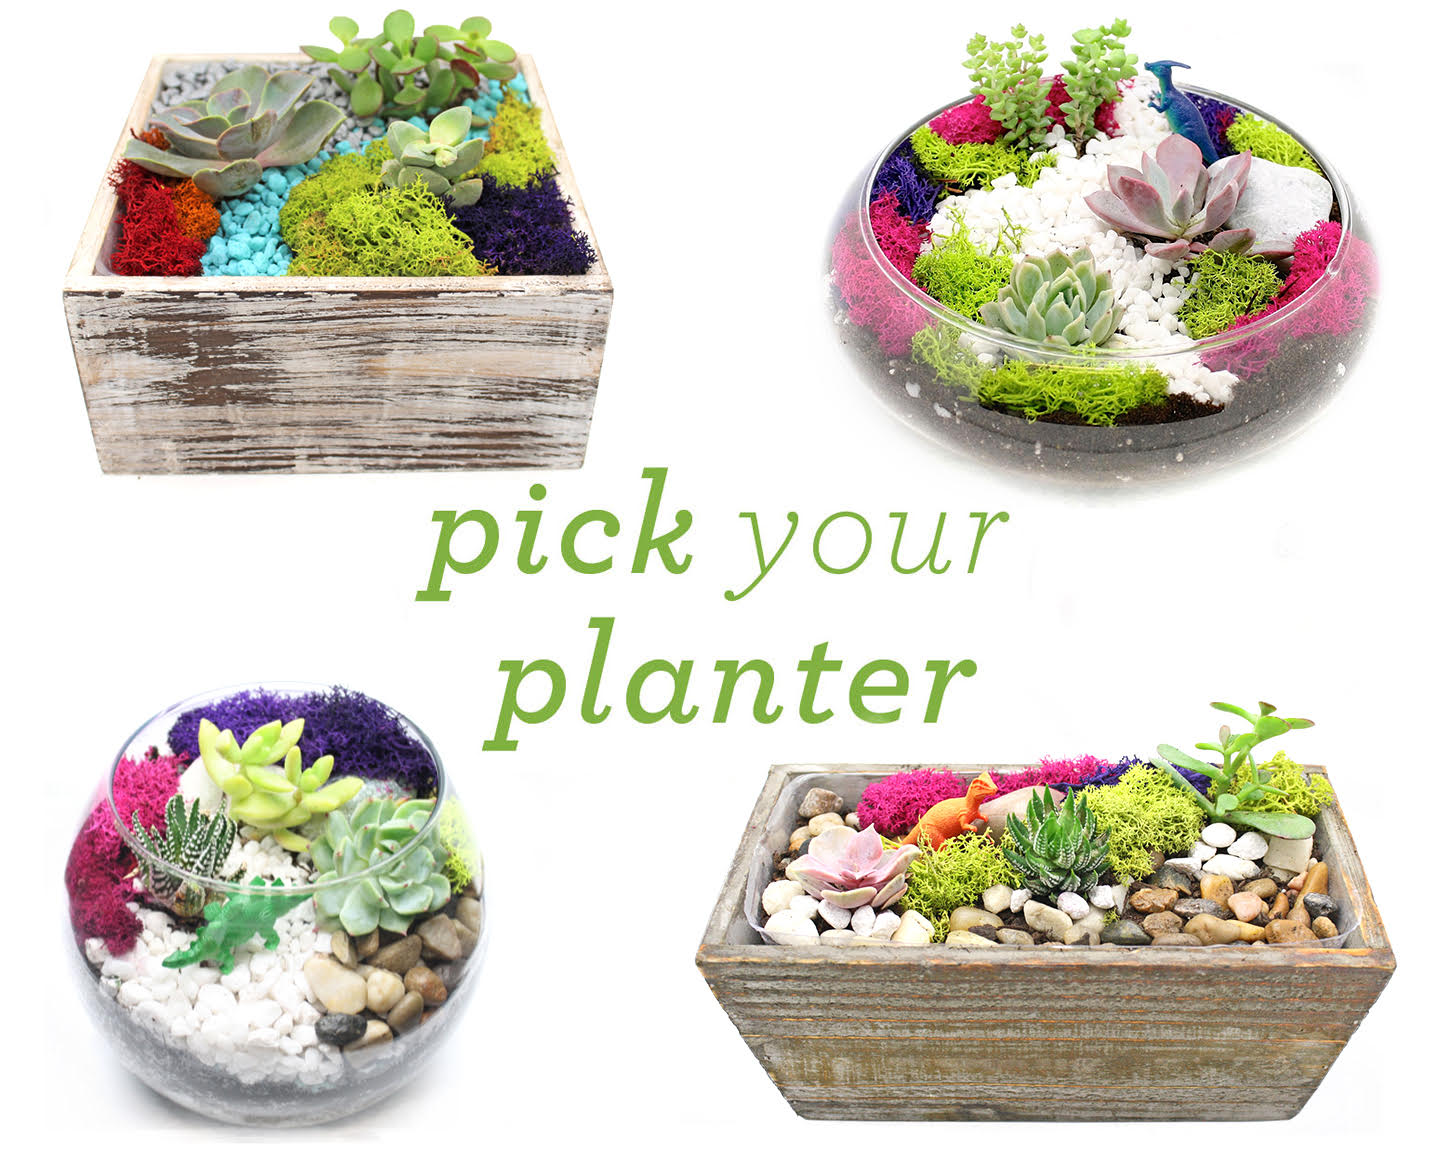 A Succulent Terrarium in Glass or Wood Container Pick Your Planter plant nite project by Yaymaker